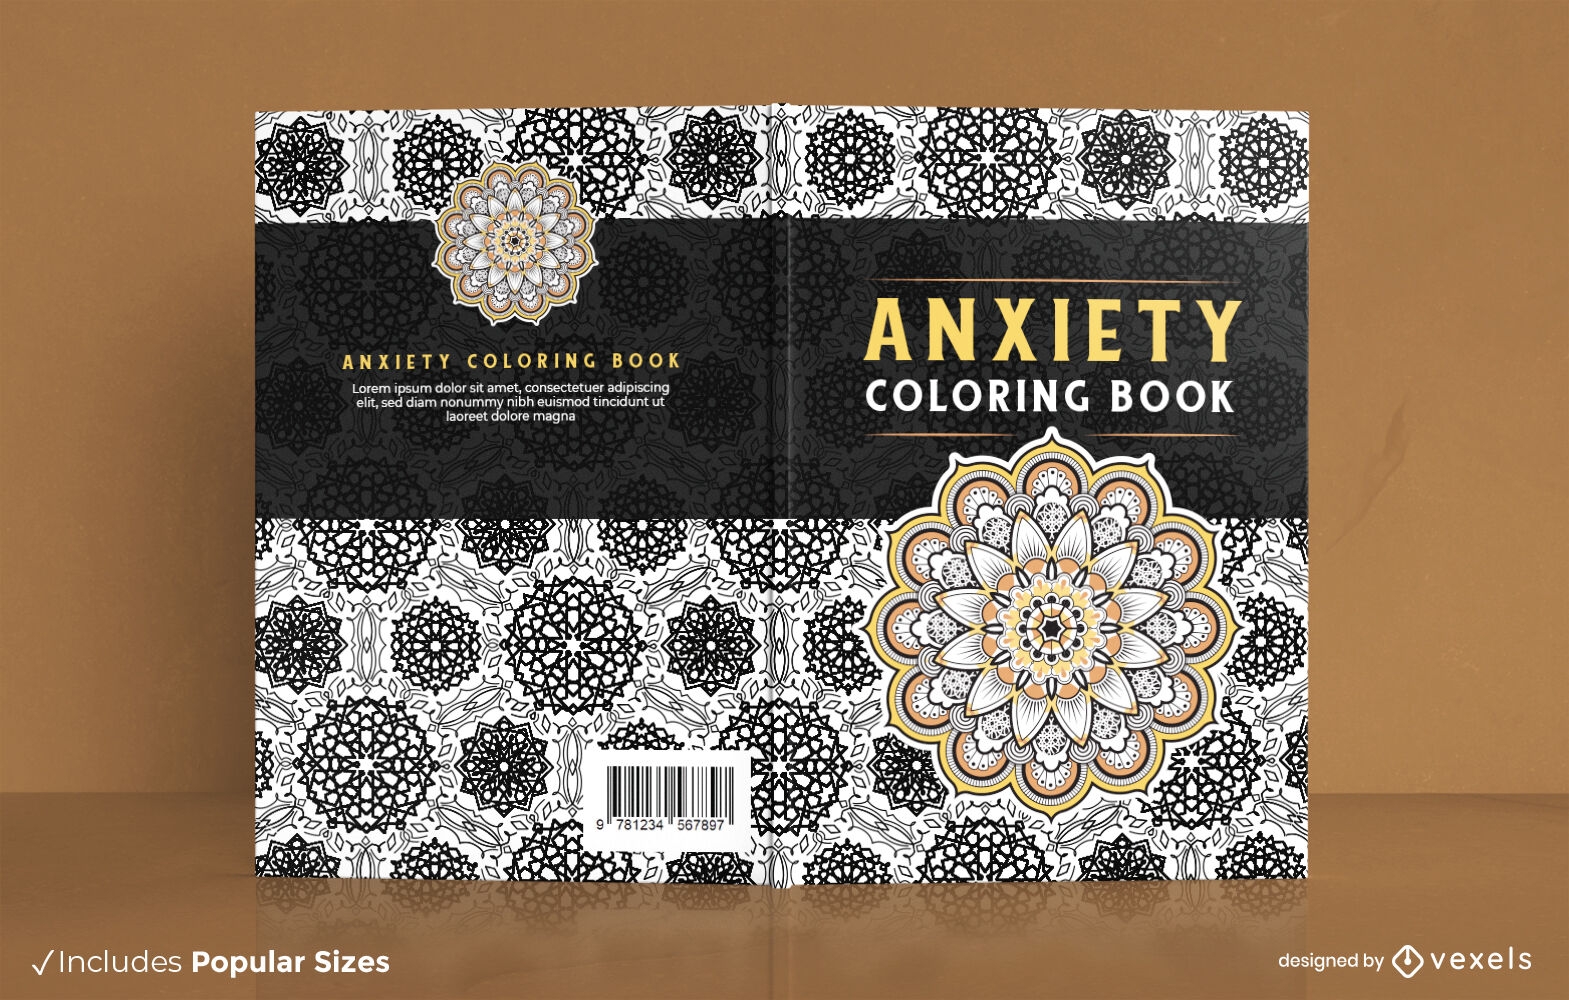 Anxiety mandala coloring book cover design